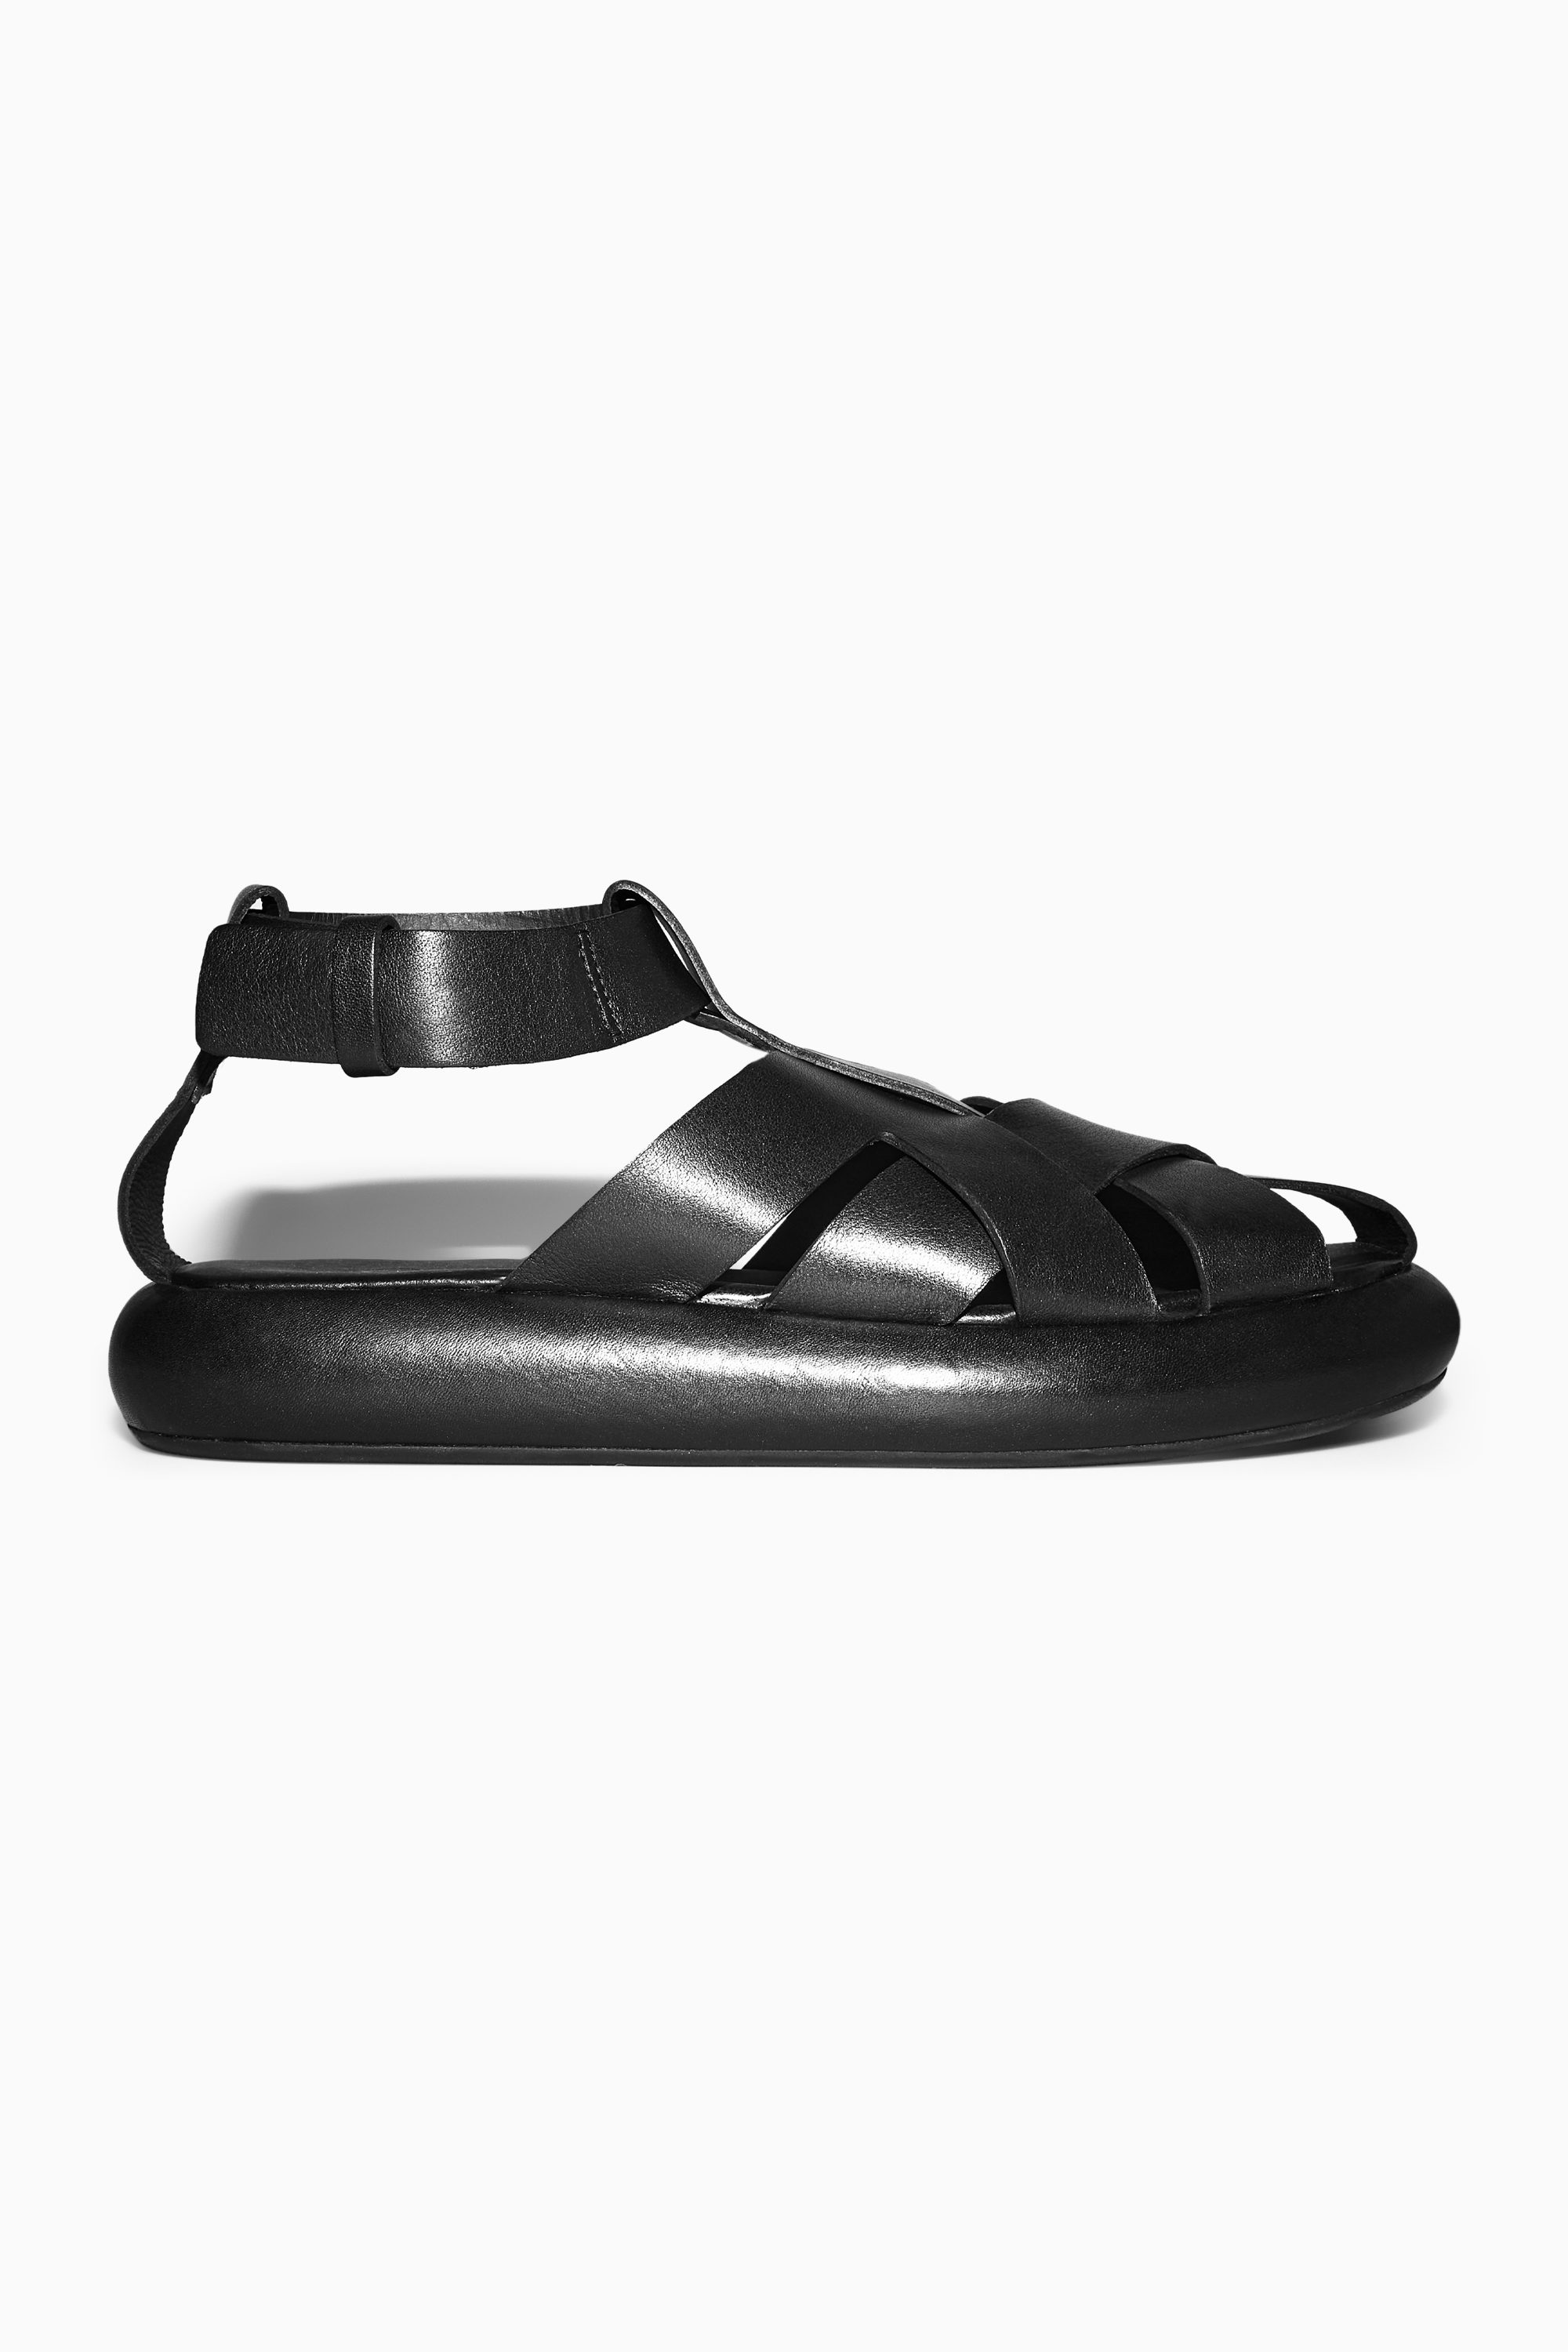 COS LEATHER FISHERMAN SANDALS 41